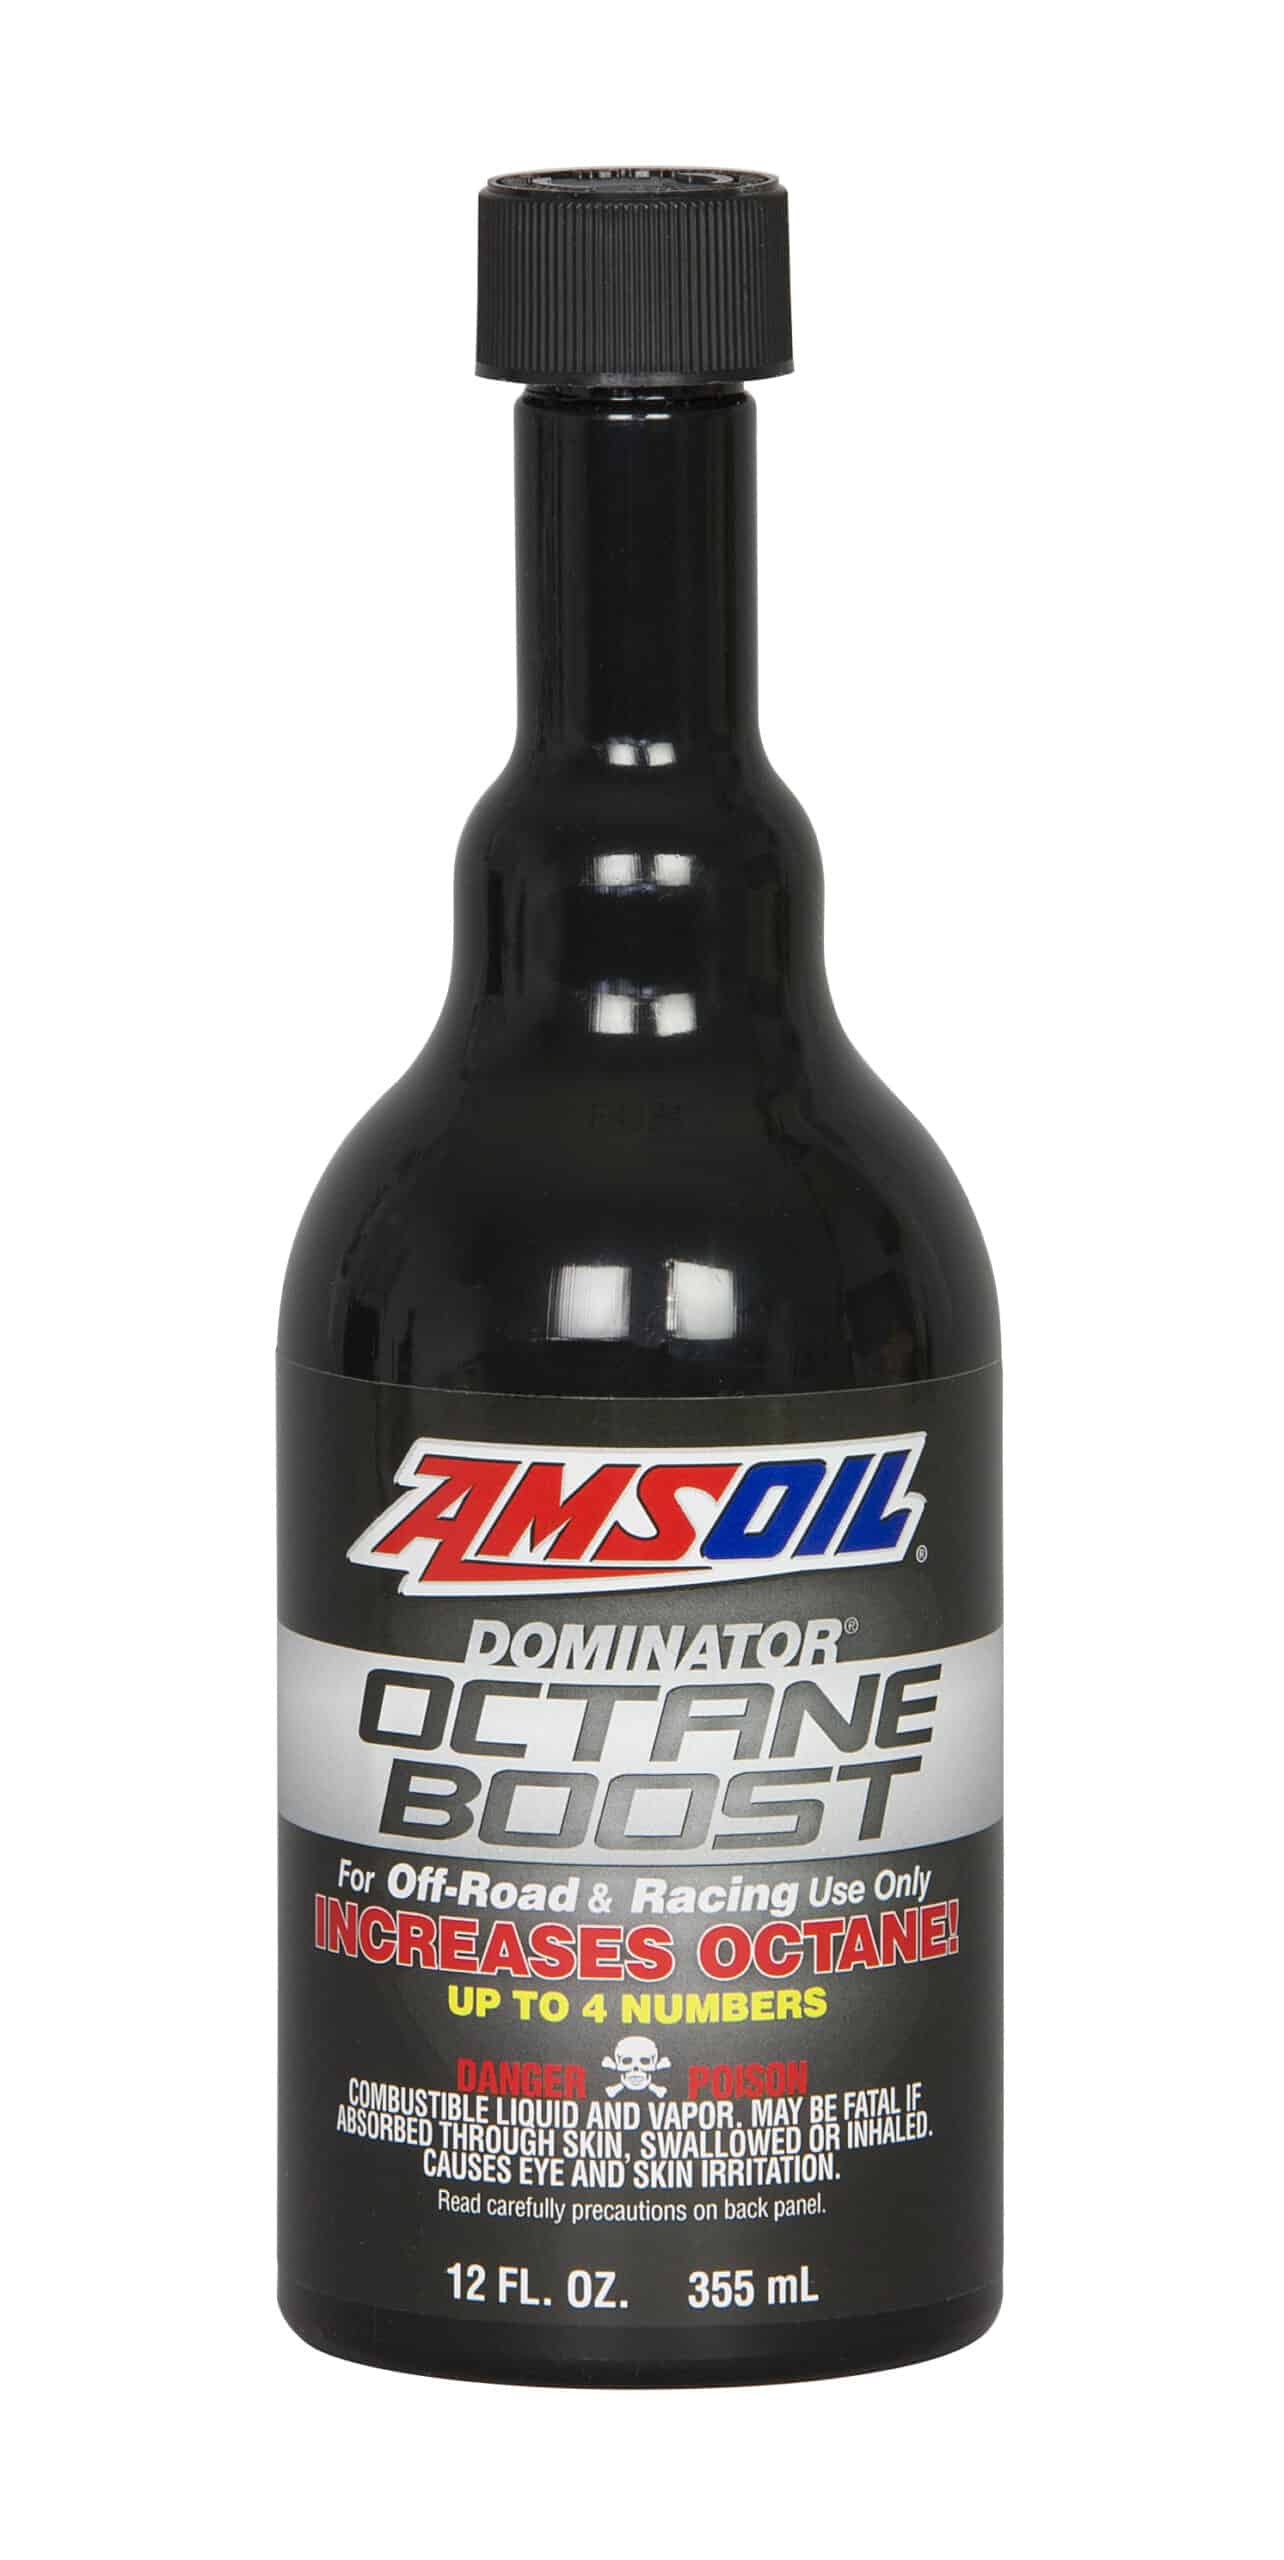 A bottle of AMSOIL DOMINATOR® Octane Boost - the recommended octane boost for all high-performance off-road and racing applications.